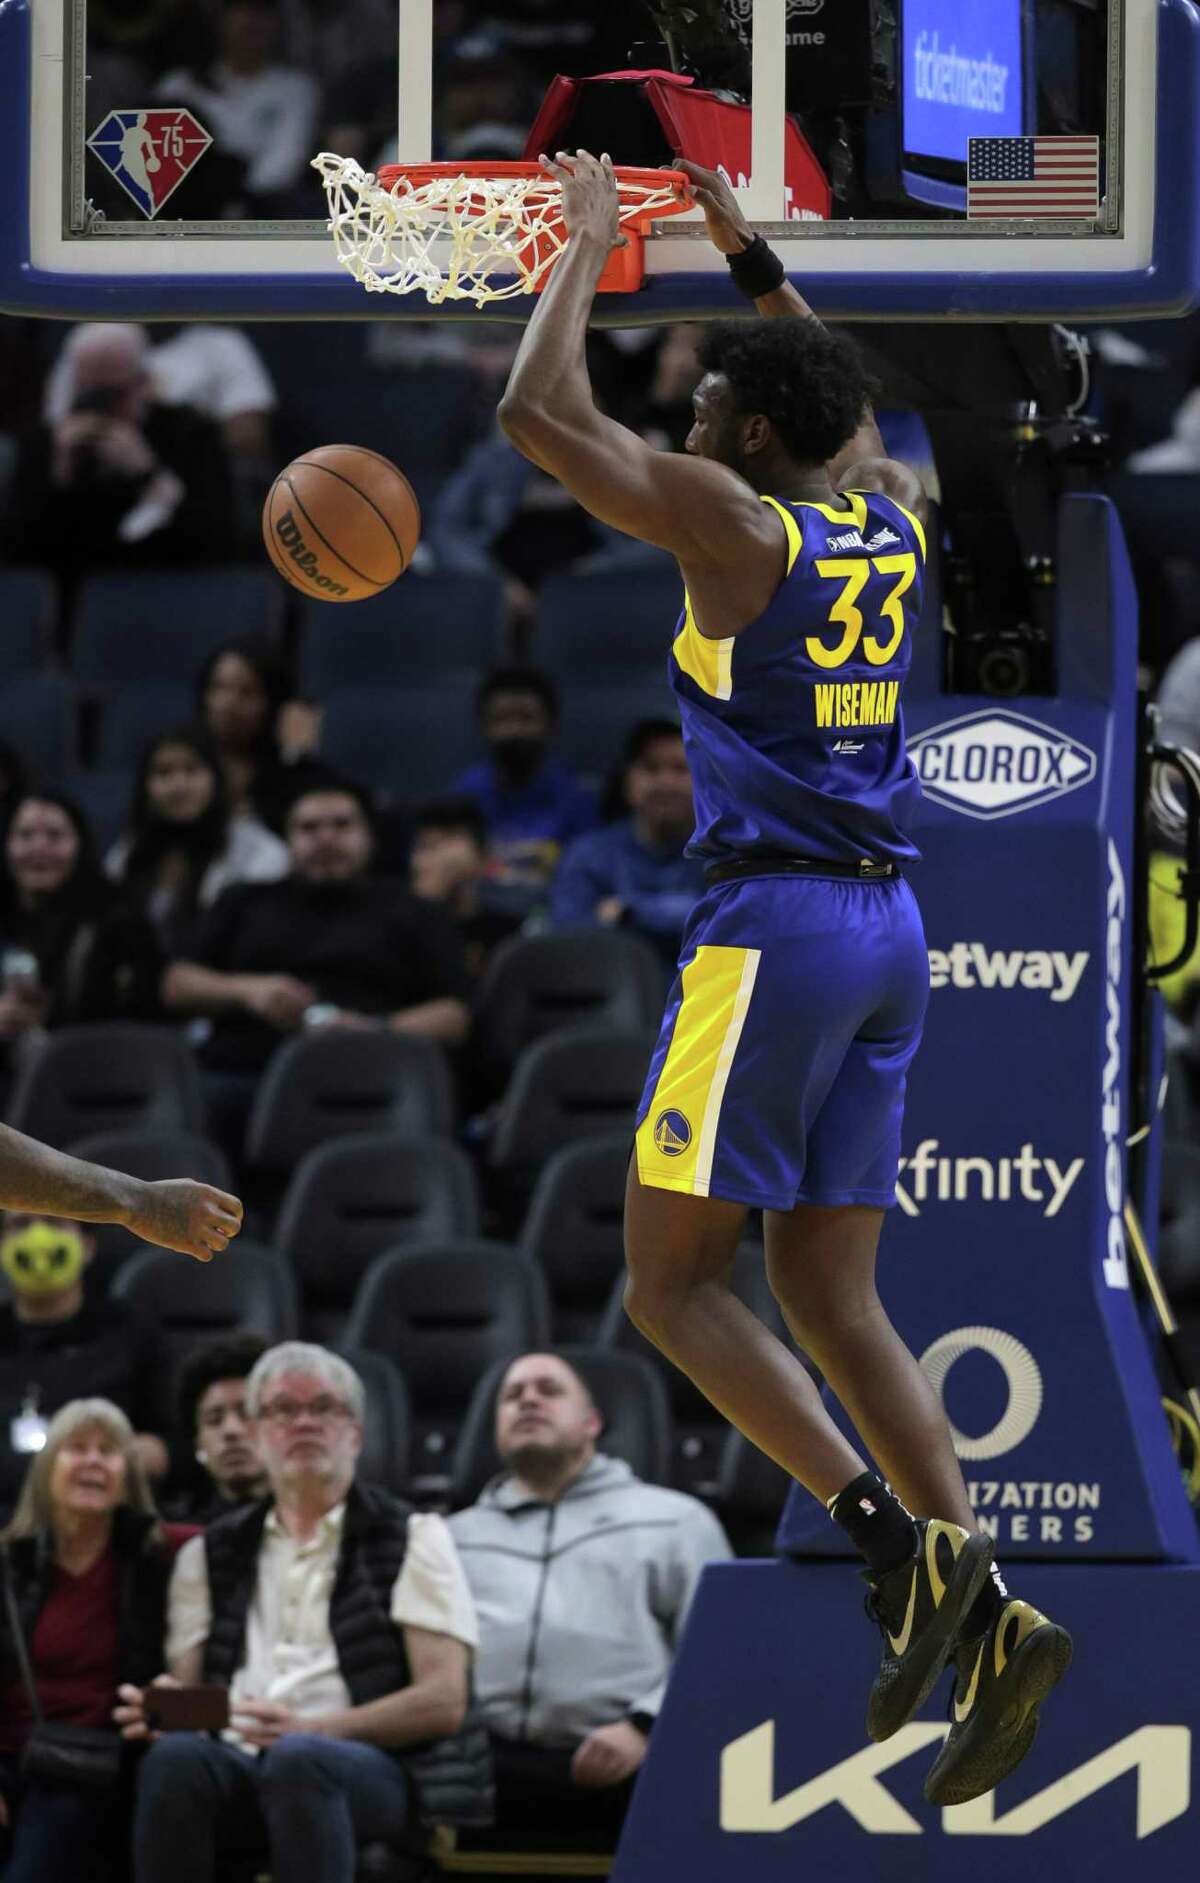 James Wiseman (33) dunks in the second half as the Santa Cruz Warriors played the G League Ignite at Chase Center in San Francisco, Calif., on Sunday, March 13, 2022.